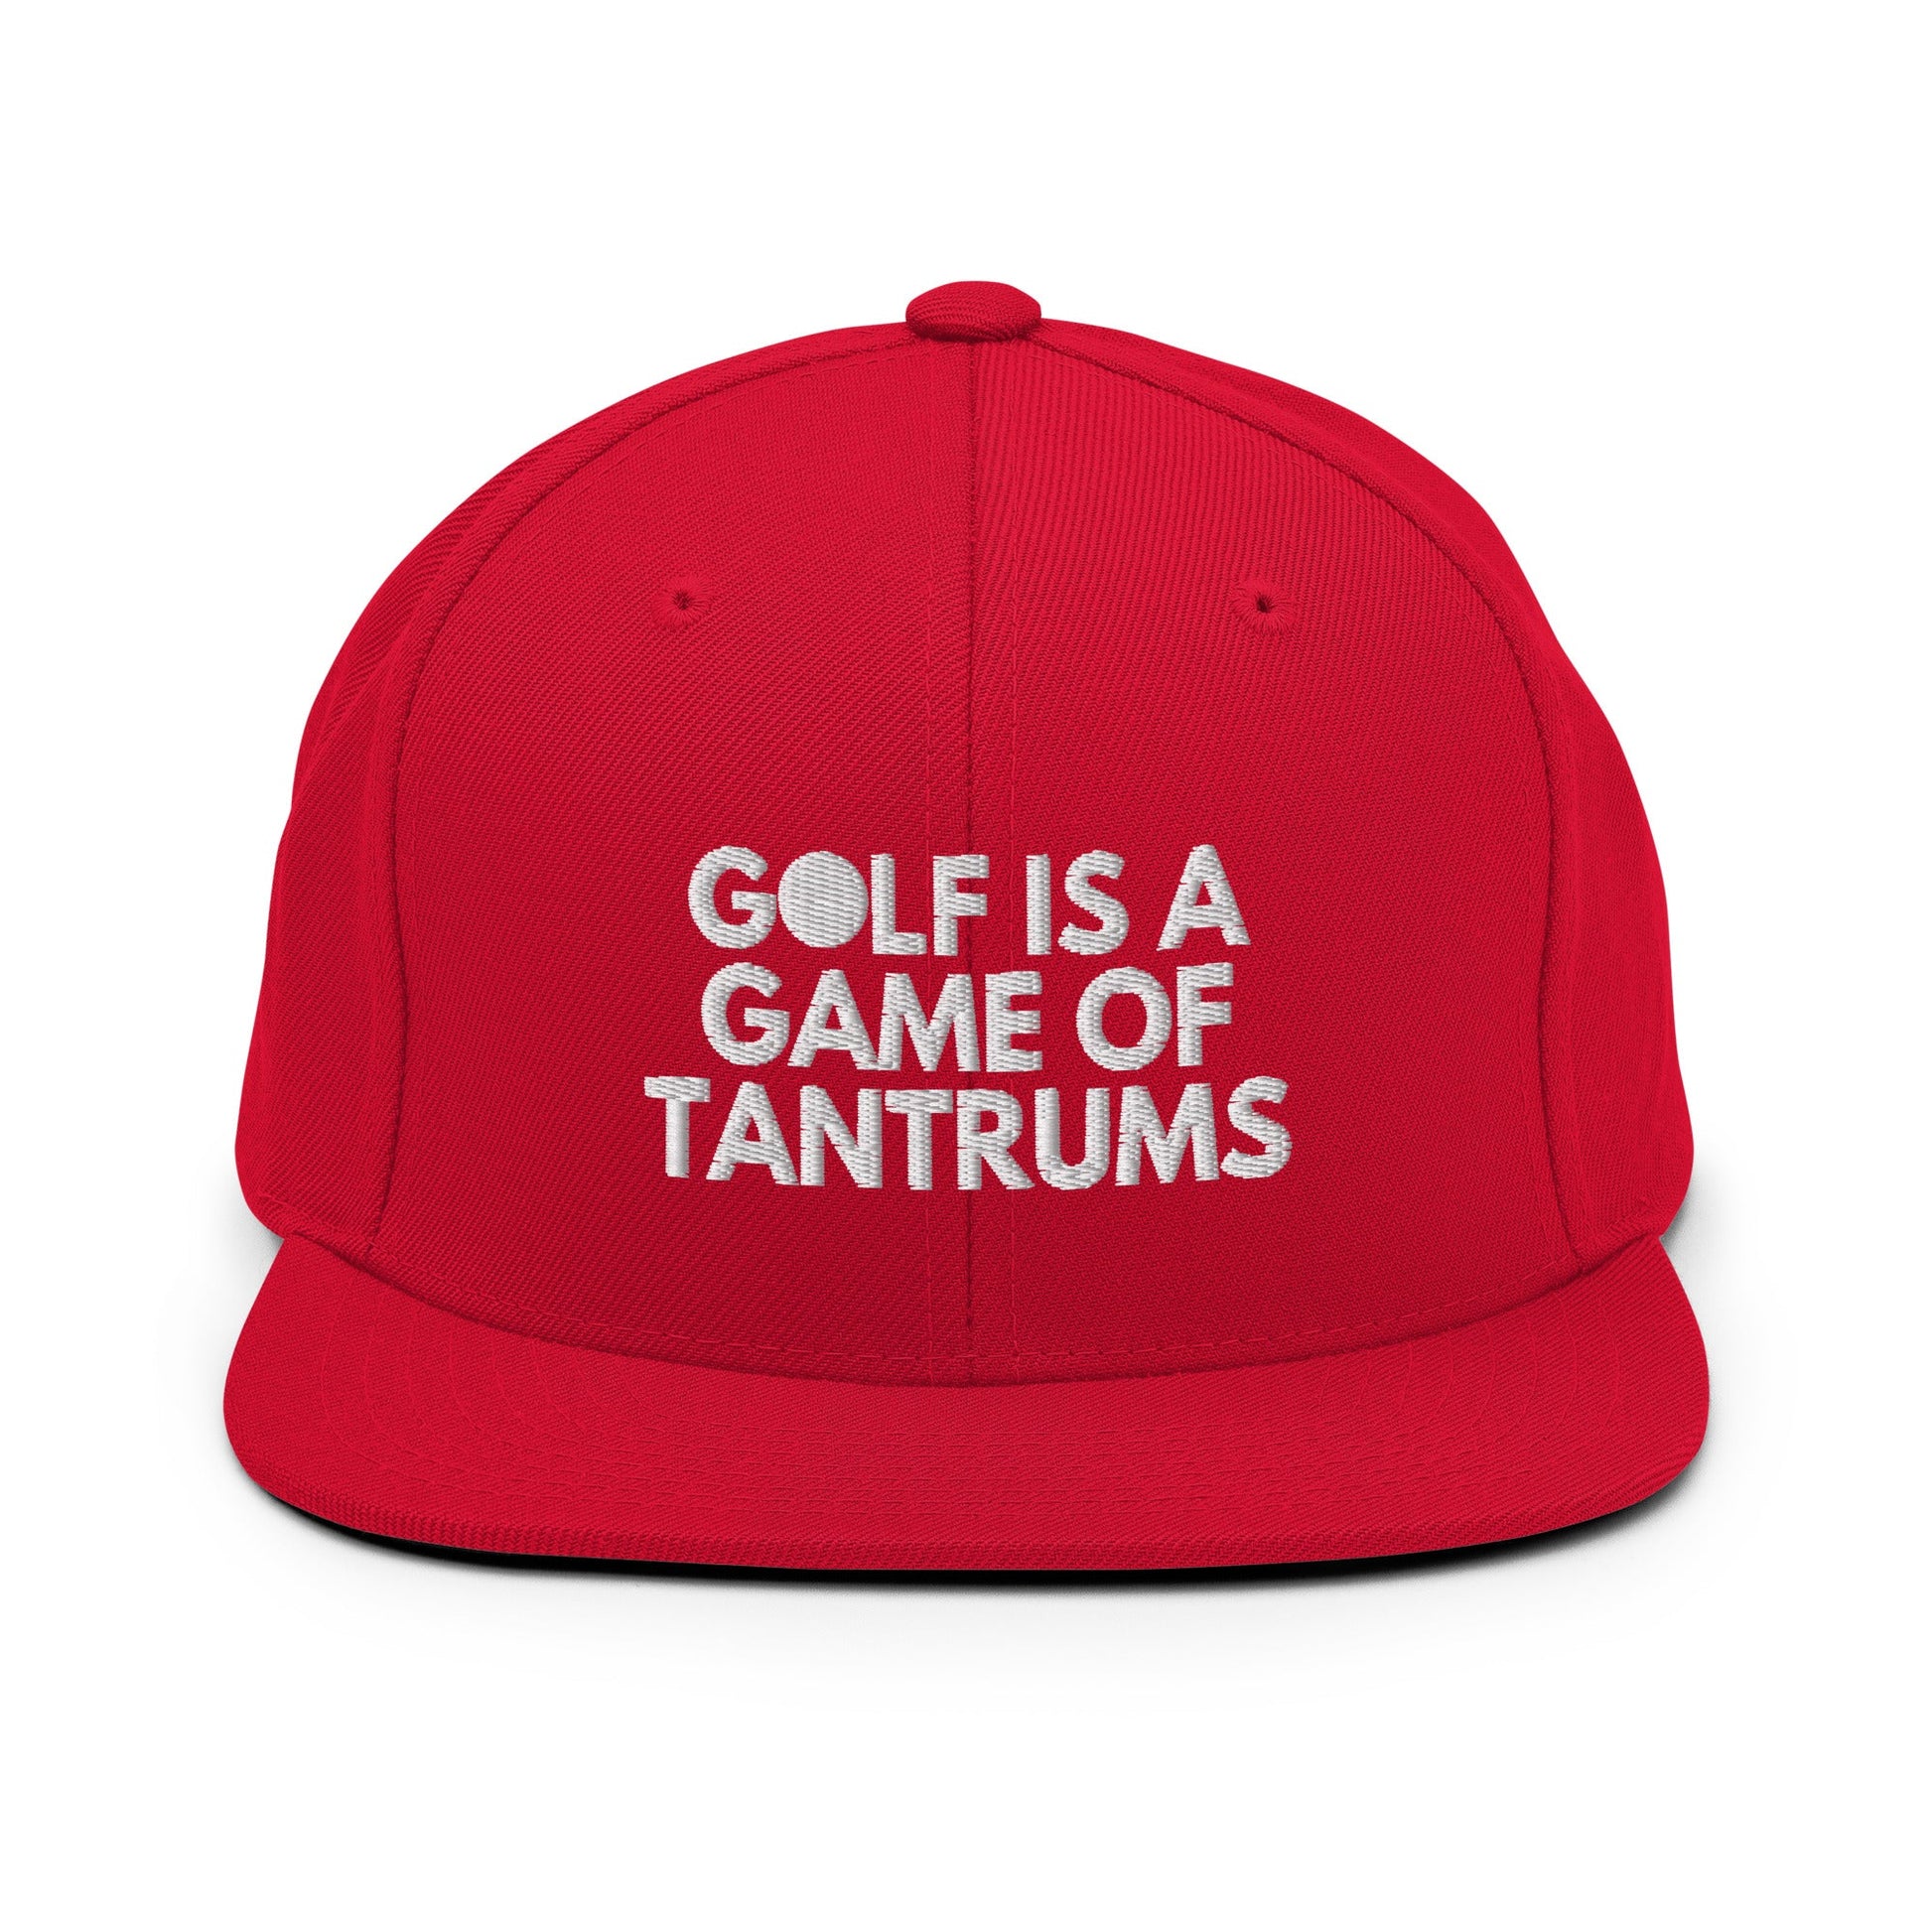 Funny Golfer Gifts  Snapback Hat Red Golf Is A Game Of Tantrums Hat Snapback Hat